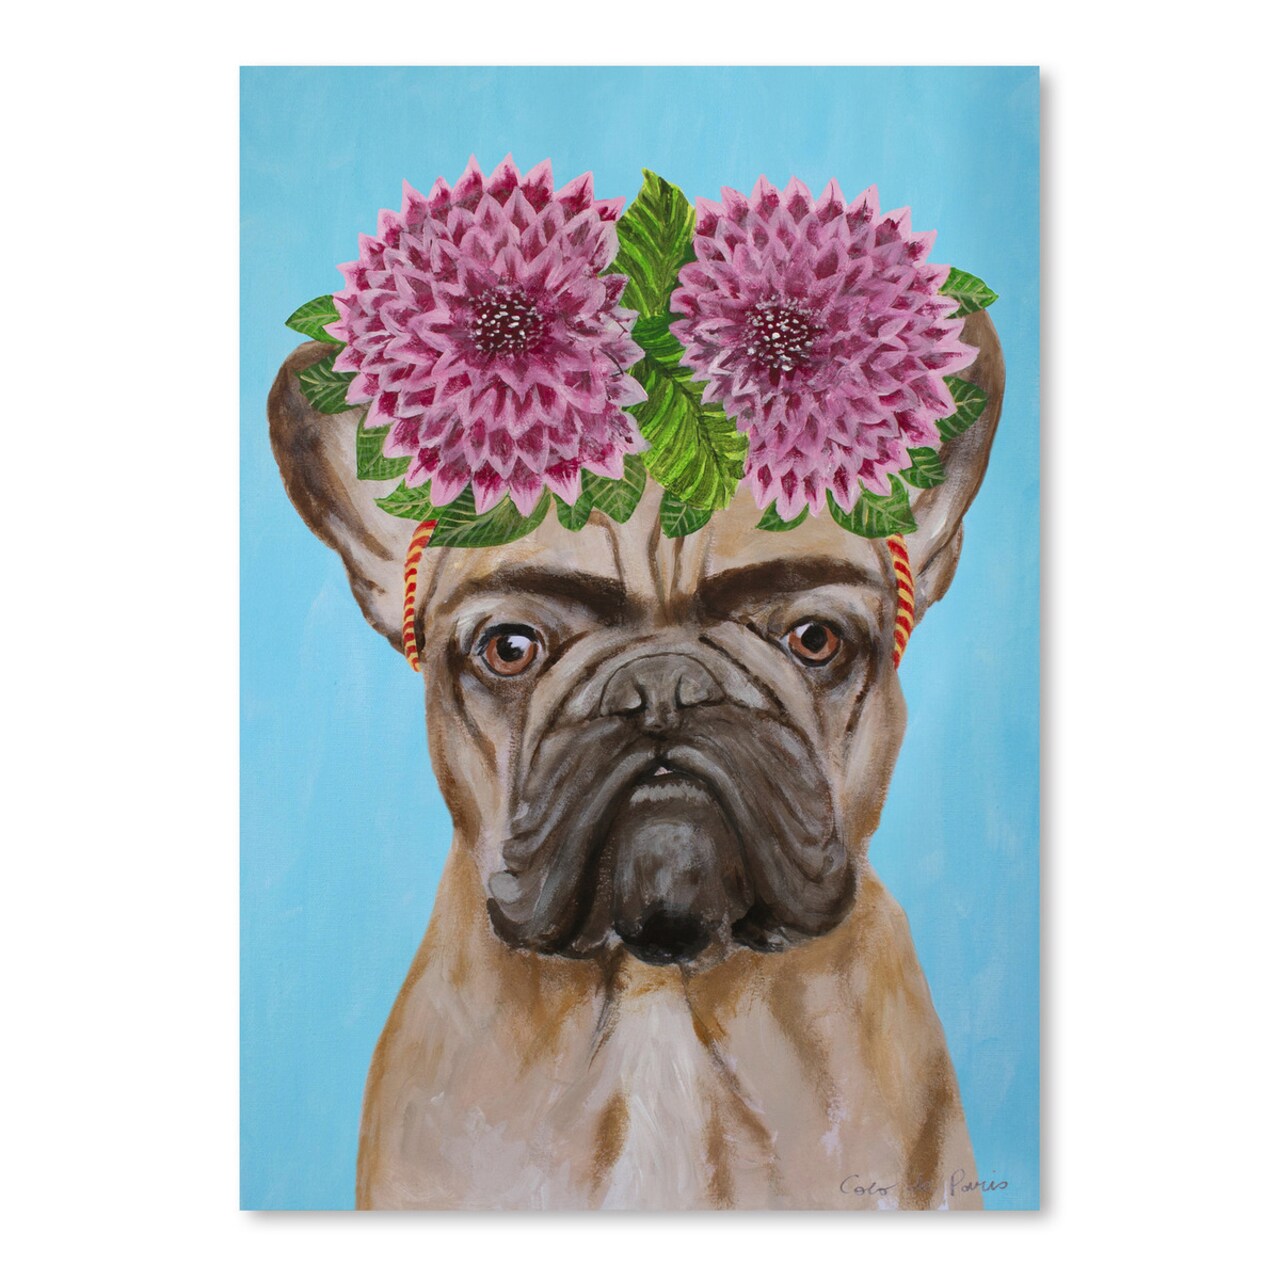 Frenchie by Coco De Paris  Poster Art Print - Americanflat